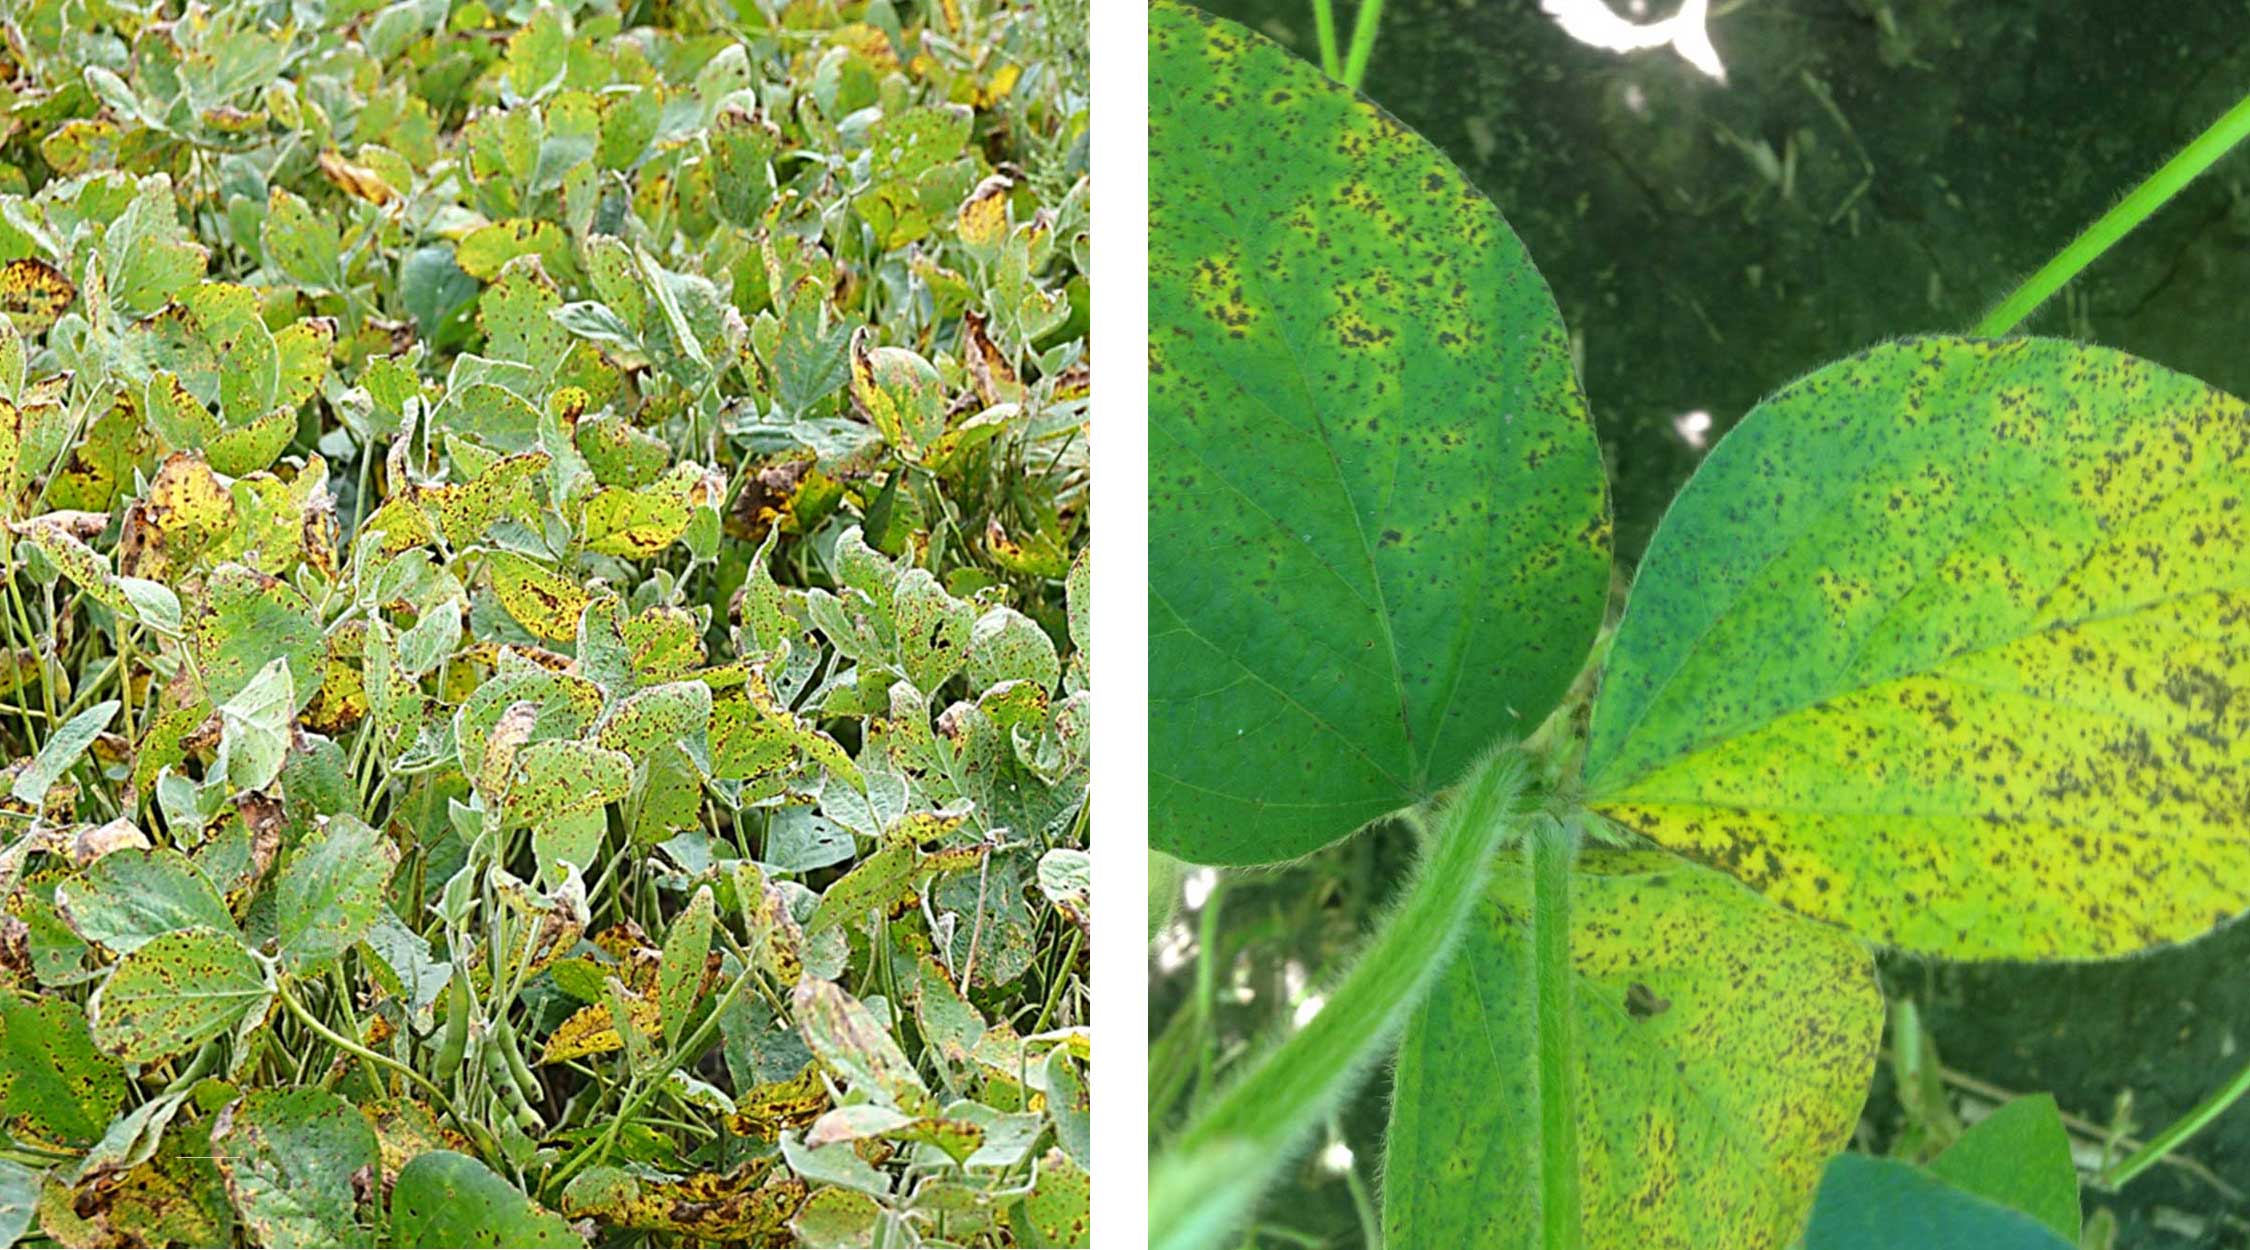 Left: Green soybean plants covered with yellow and brown spots indicative of frogeye leaf spot infection.  Right: Green soybean trifoliate that is covered in brown spots.